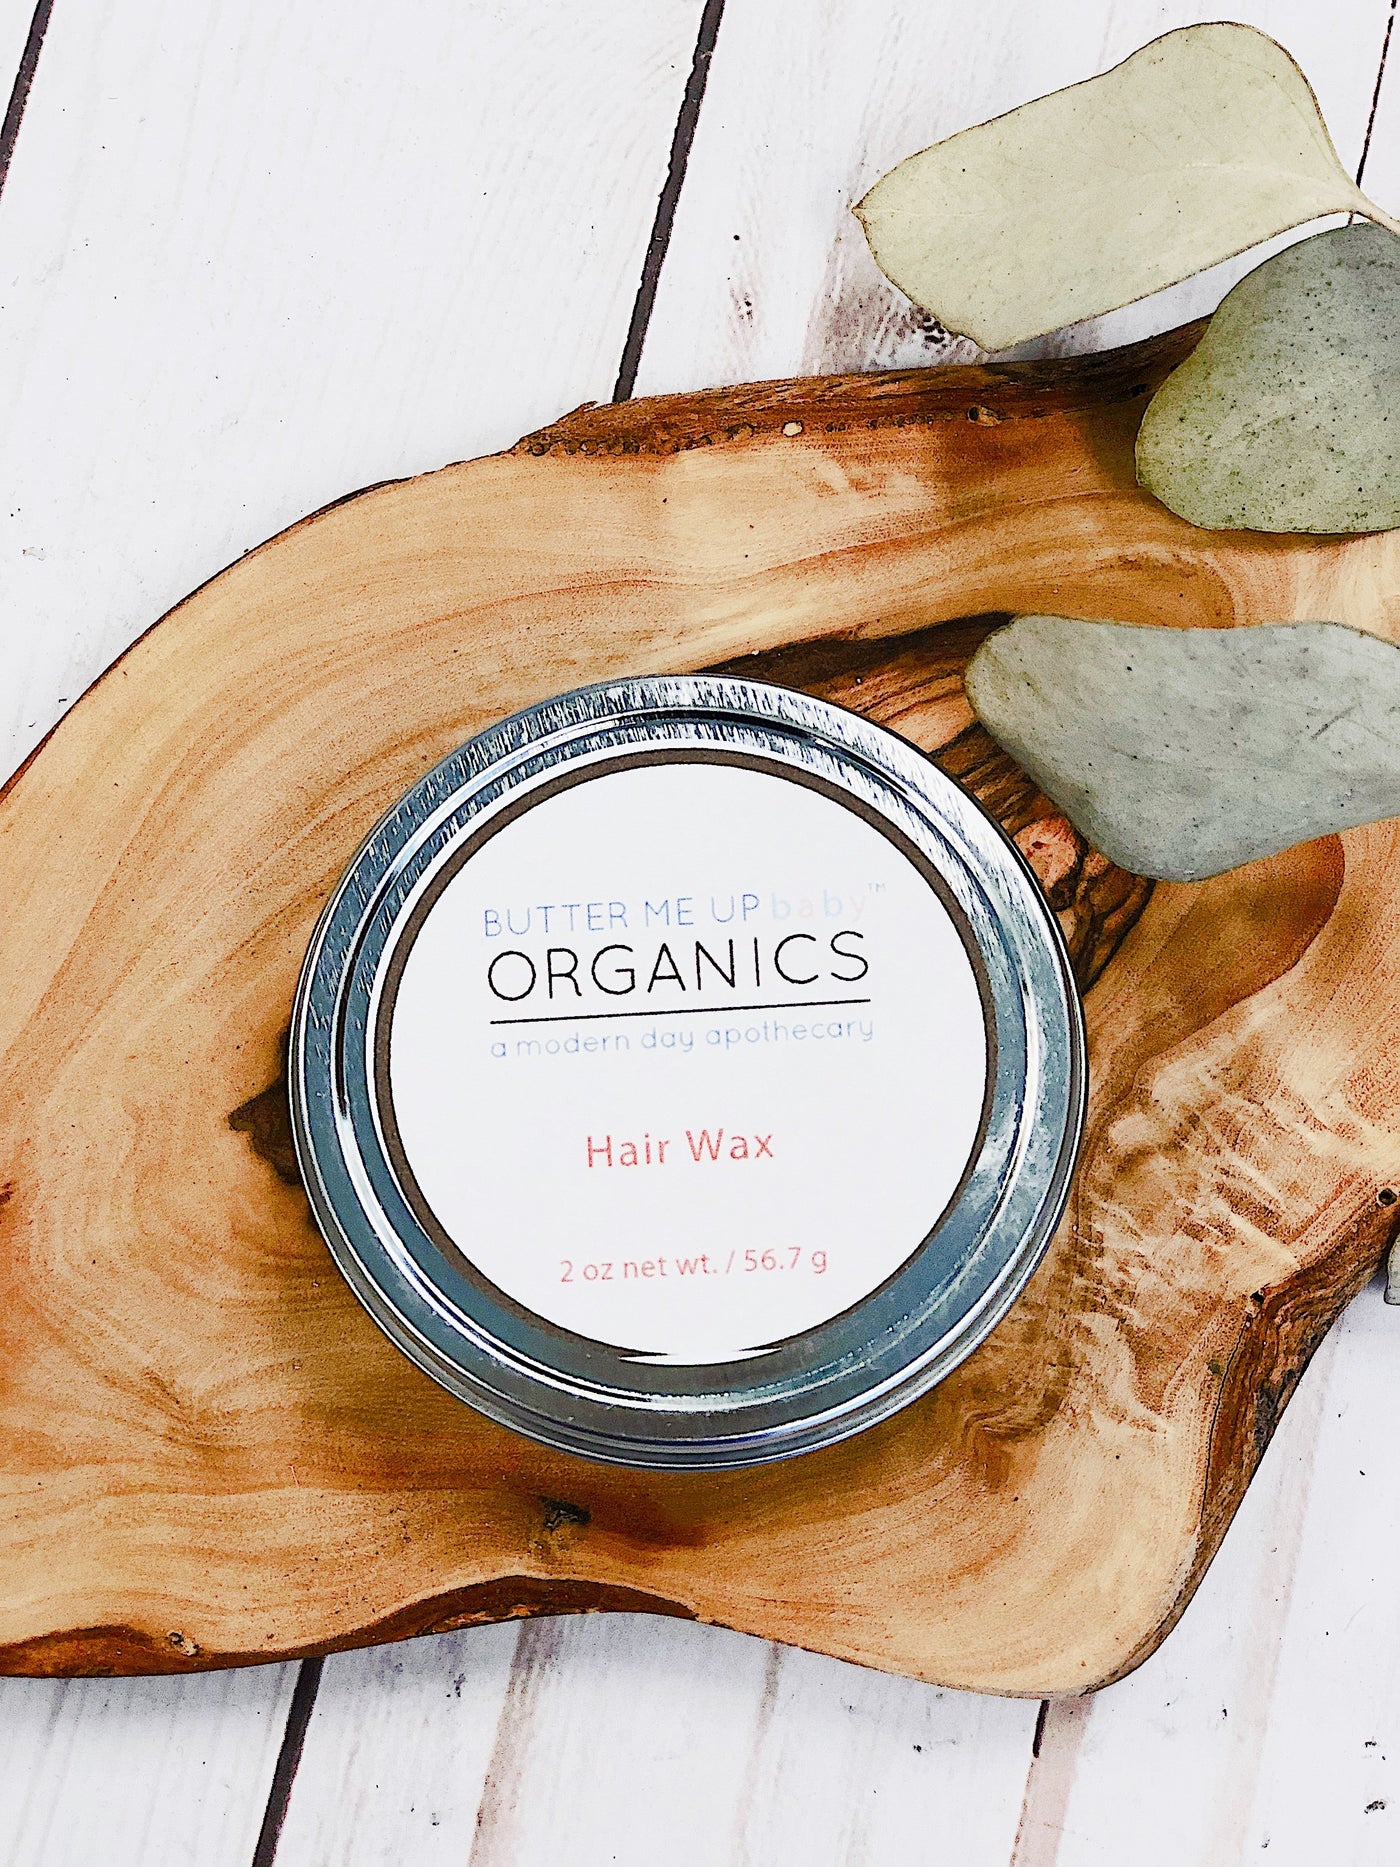 Organic Hair Wax for Babies, Children and Adults - Roses & Chains | Fashionable Clothing, Shoes, Accessories, & More